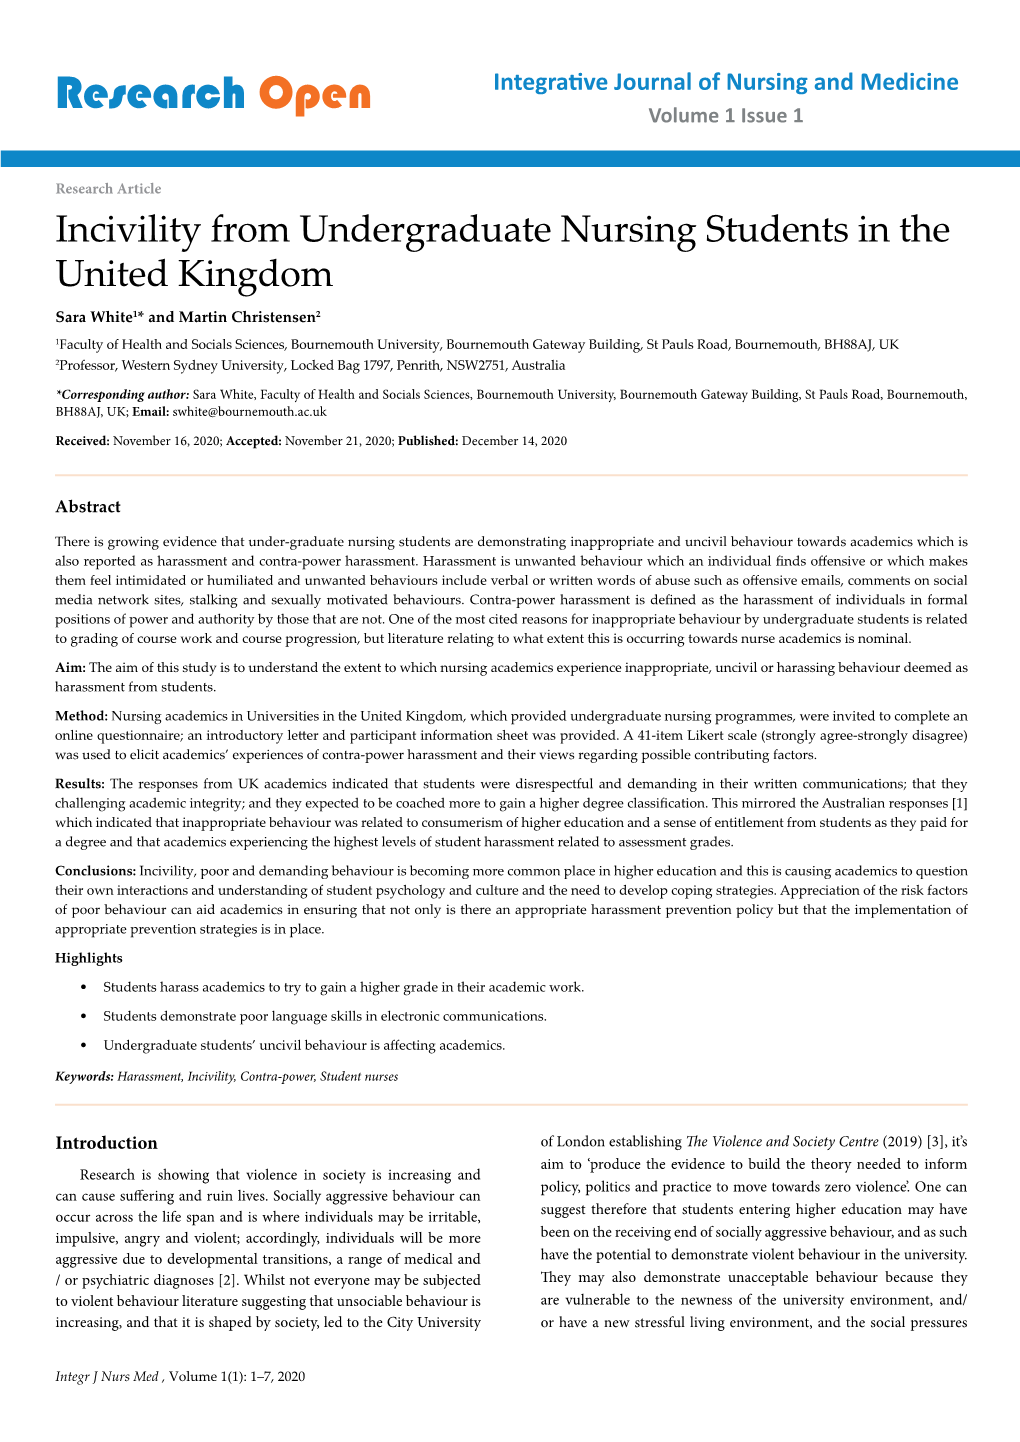 Incivility from Undergraduate Nursing Students In